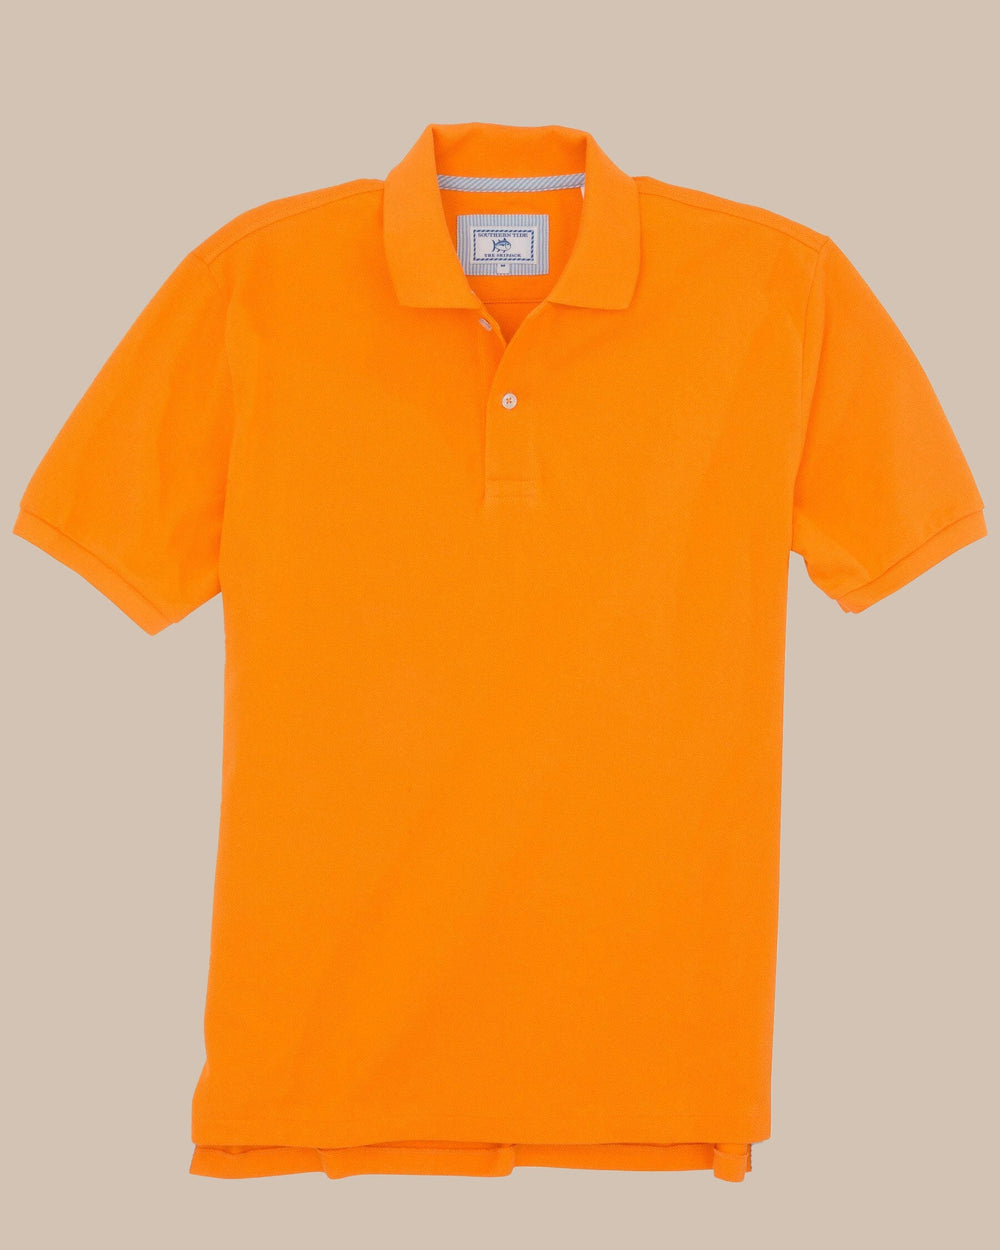 The front view of the Men's Orange Skipjack Gameday Colors Polo Shirt by Southern Tide - Rocky Top Orange